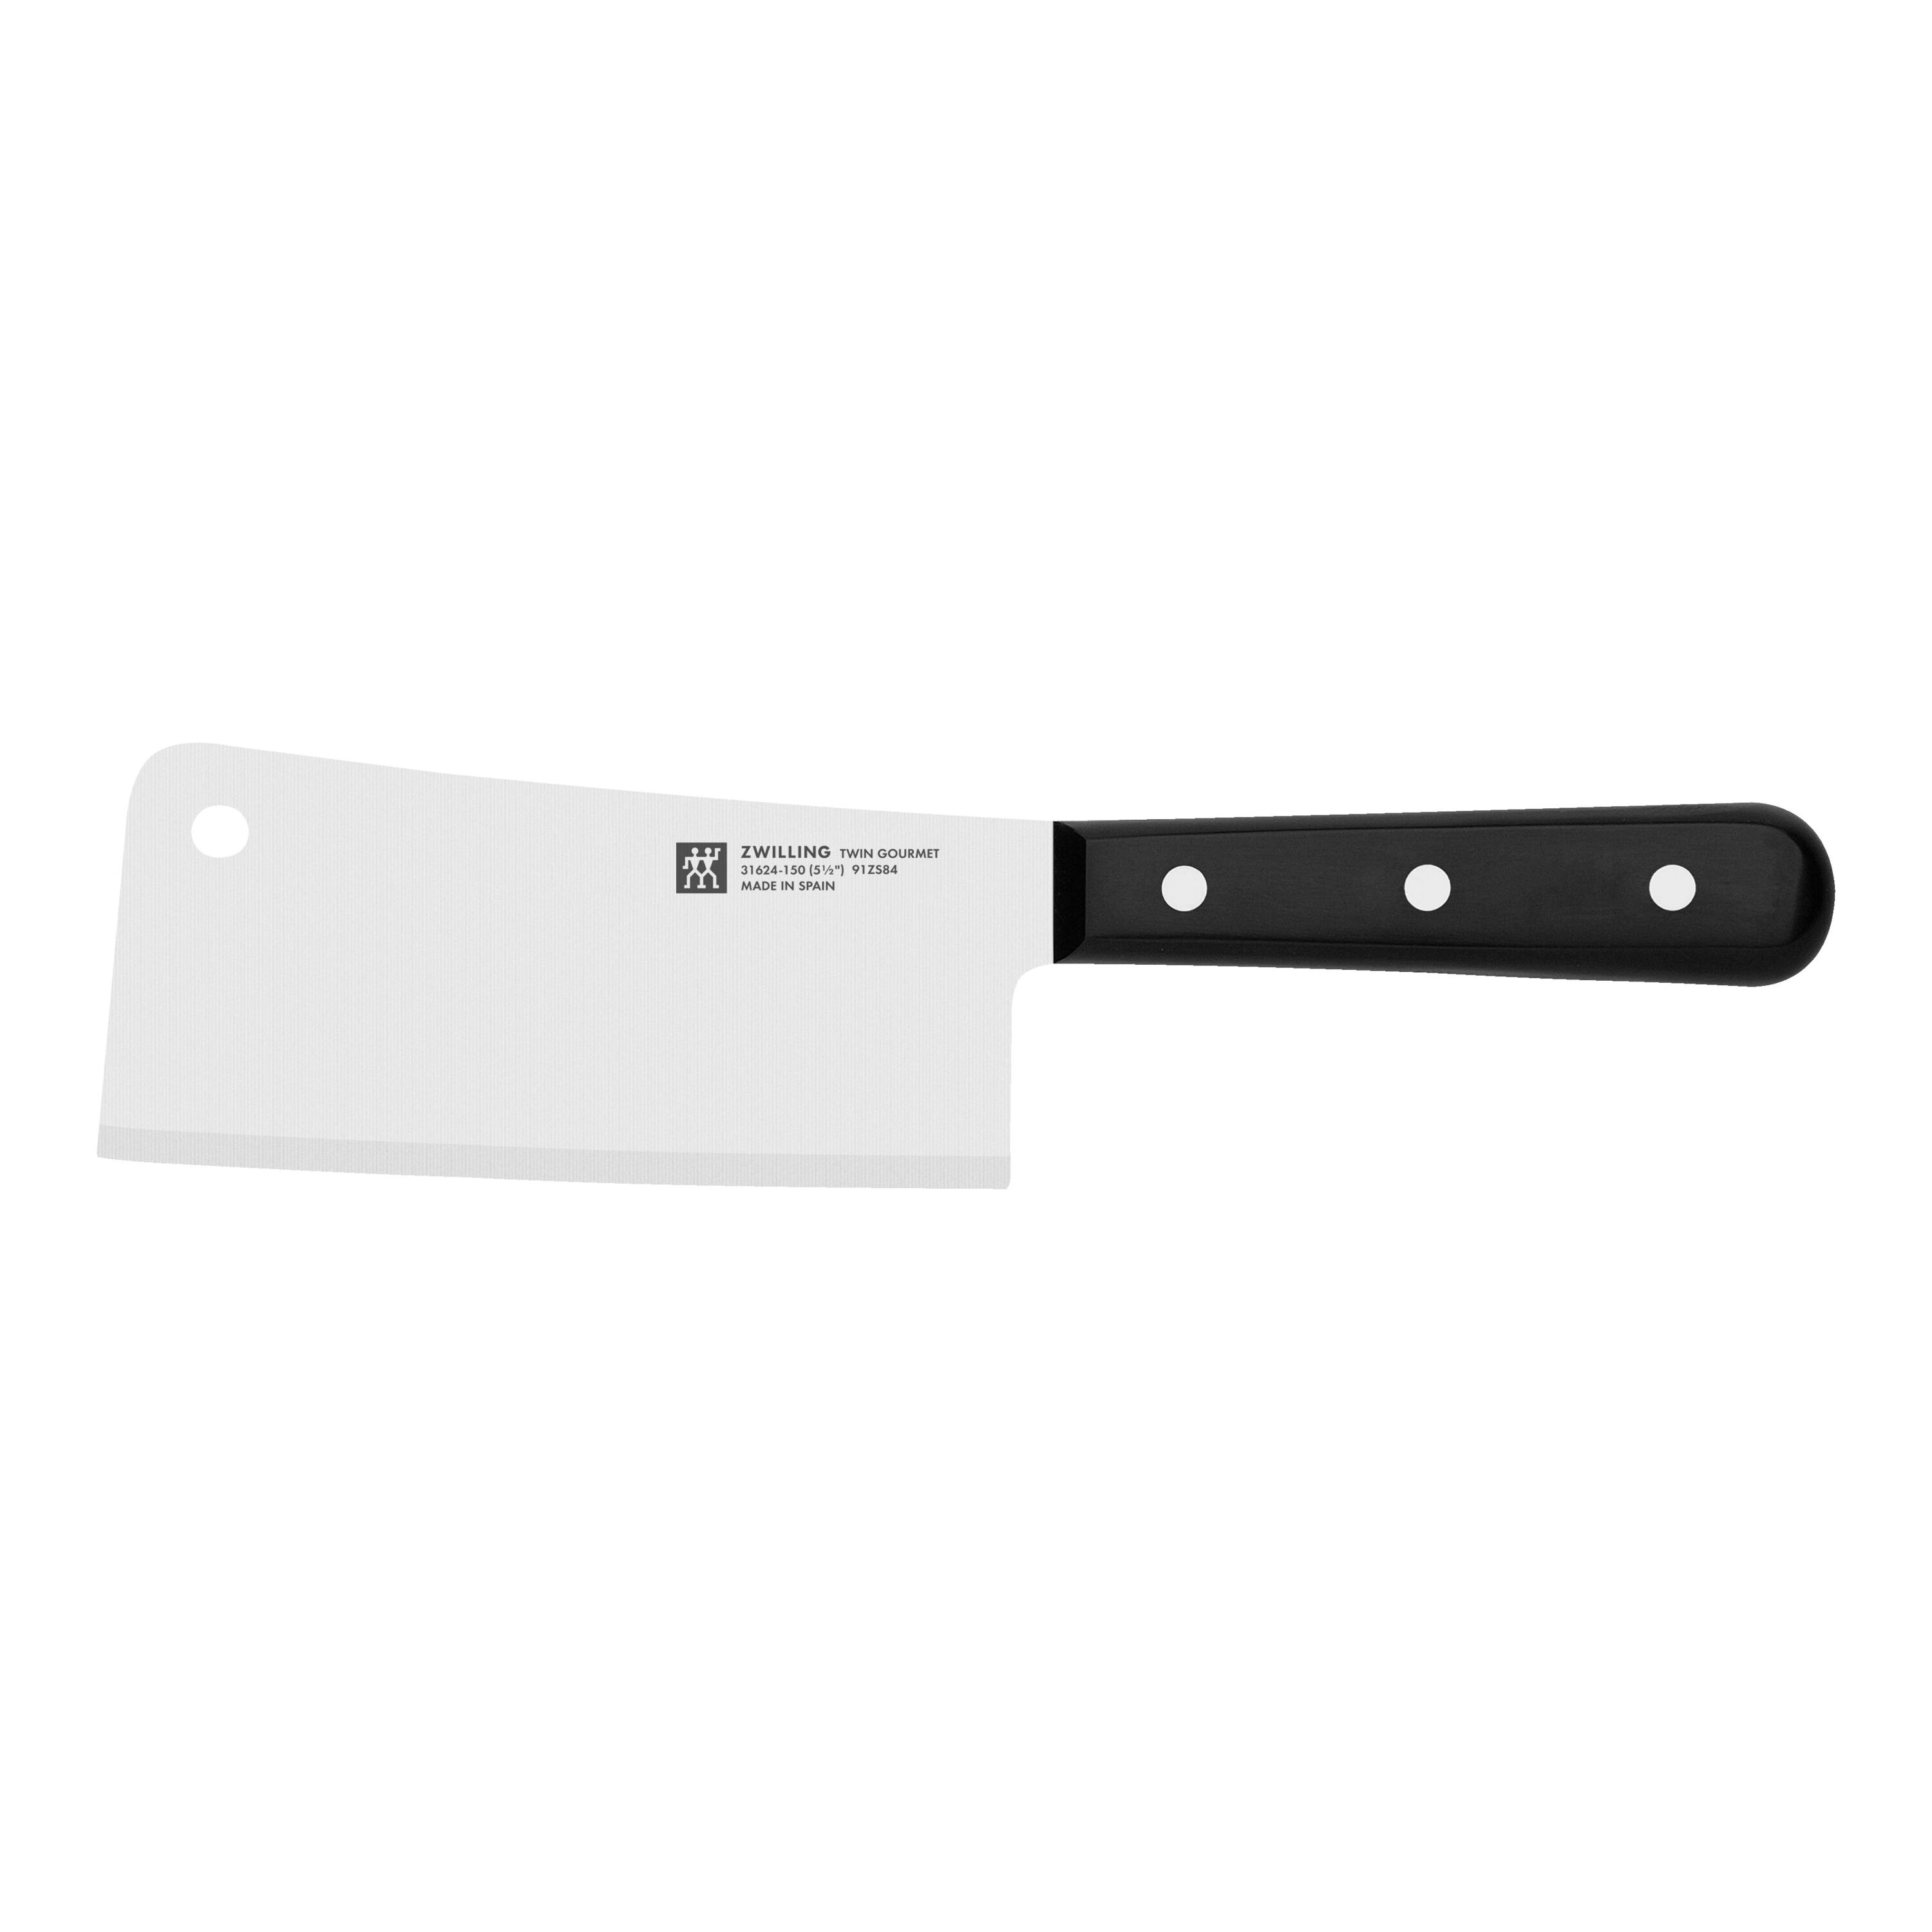 Henckels Forged Premio 6-inch Meat Cleaver & Reviews